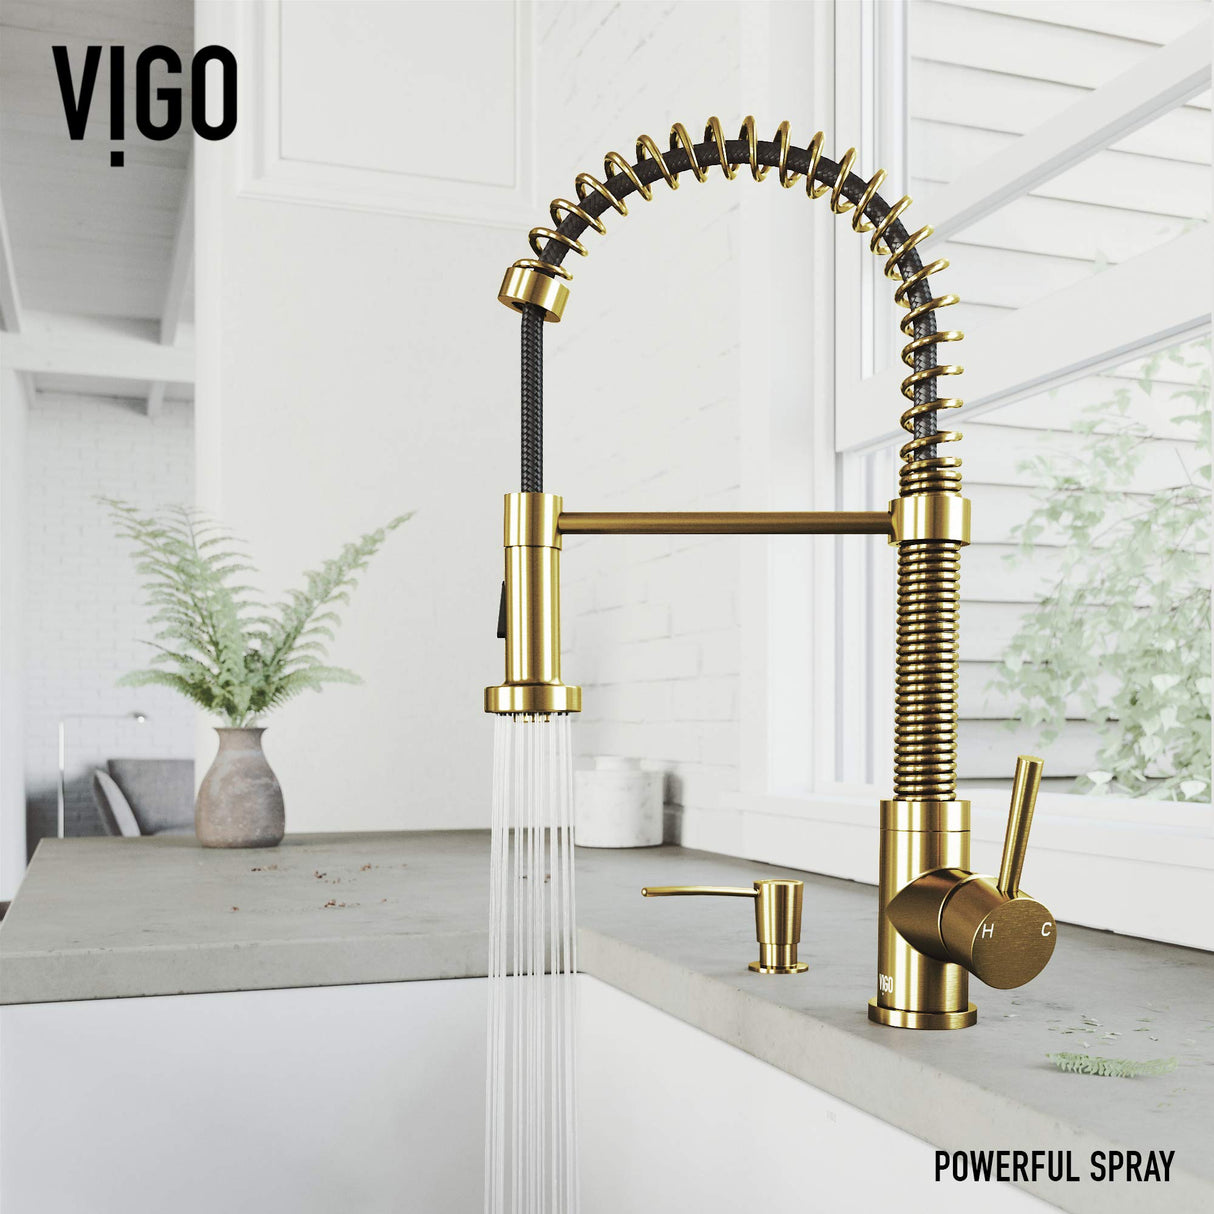 VIGO VG02001MGK2 19" H Edison Single-Handle with Pull-Down Sprayer Kitchen Faucet with Soap Dispenser in Matte Gold